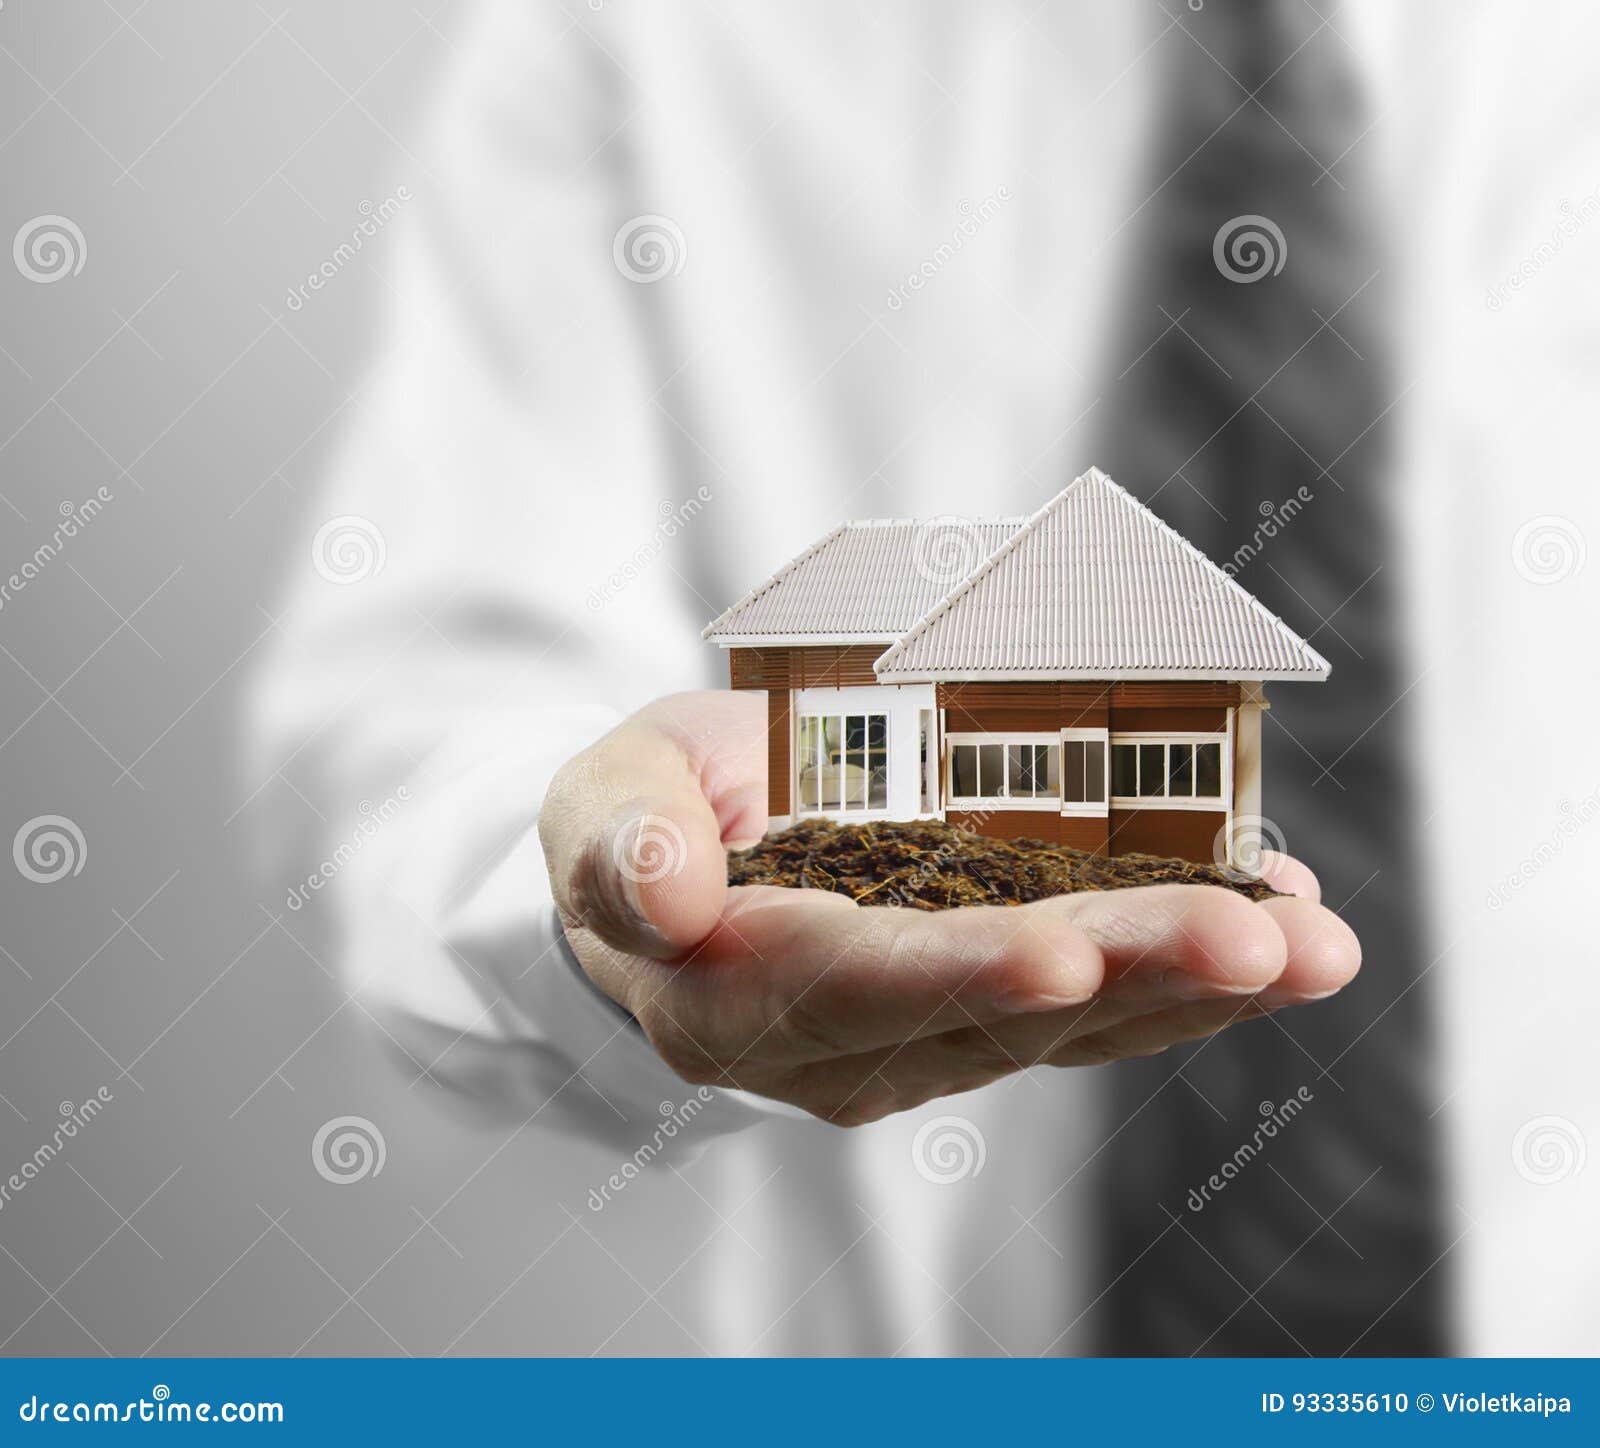 home insurance concept in hand